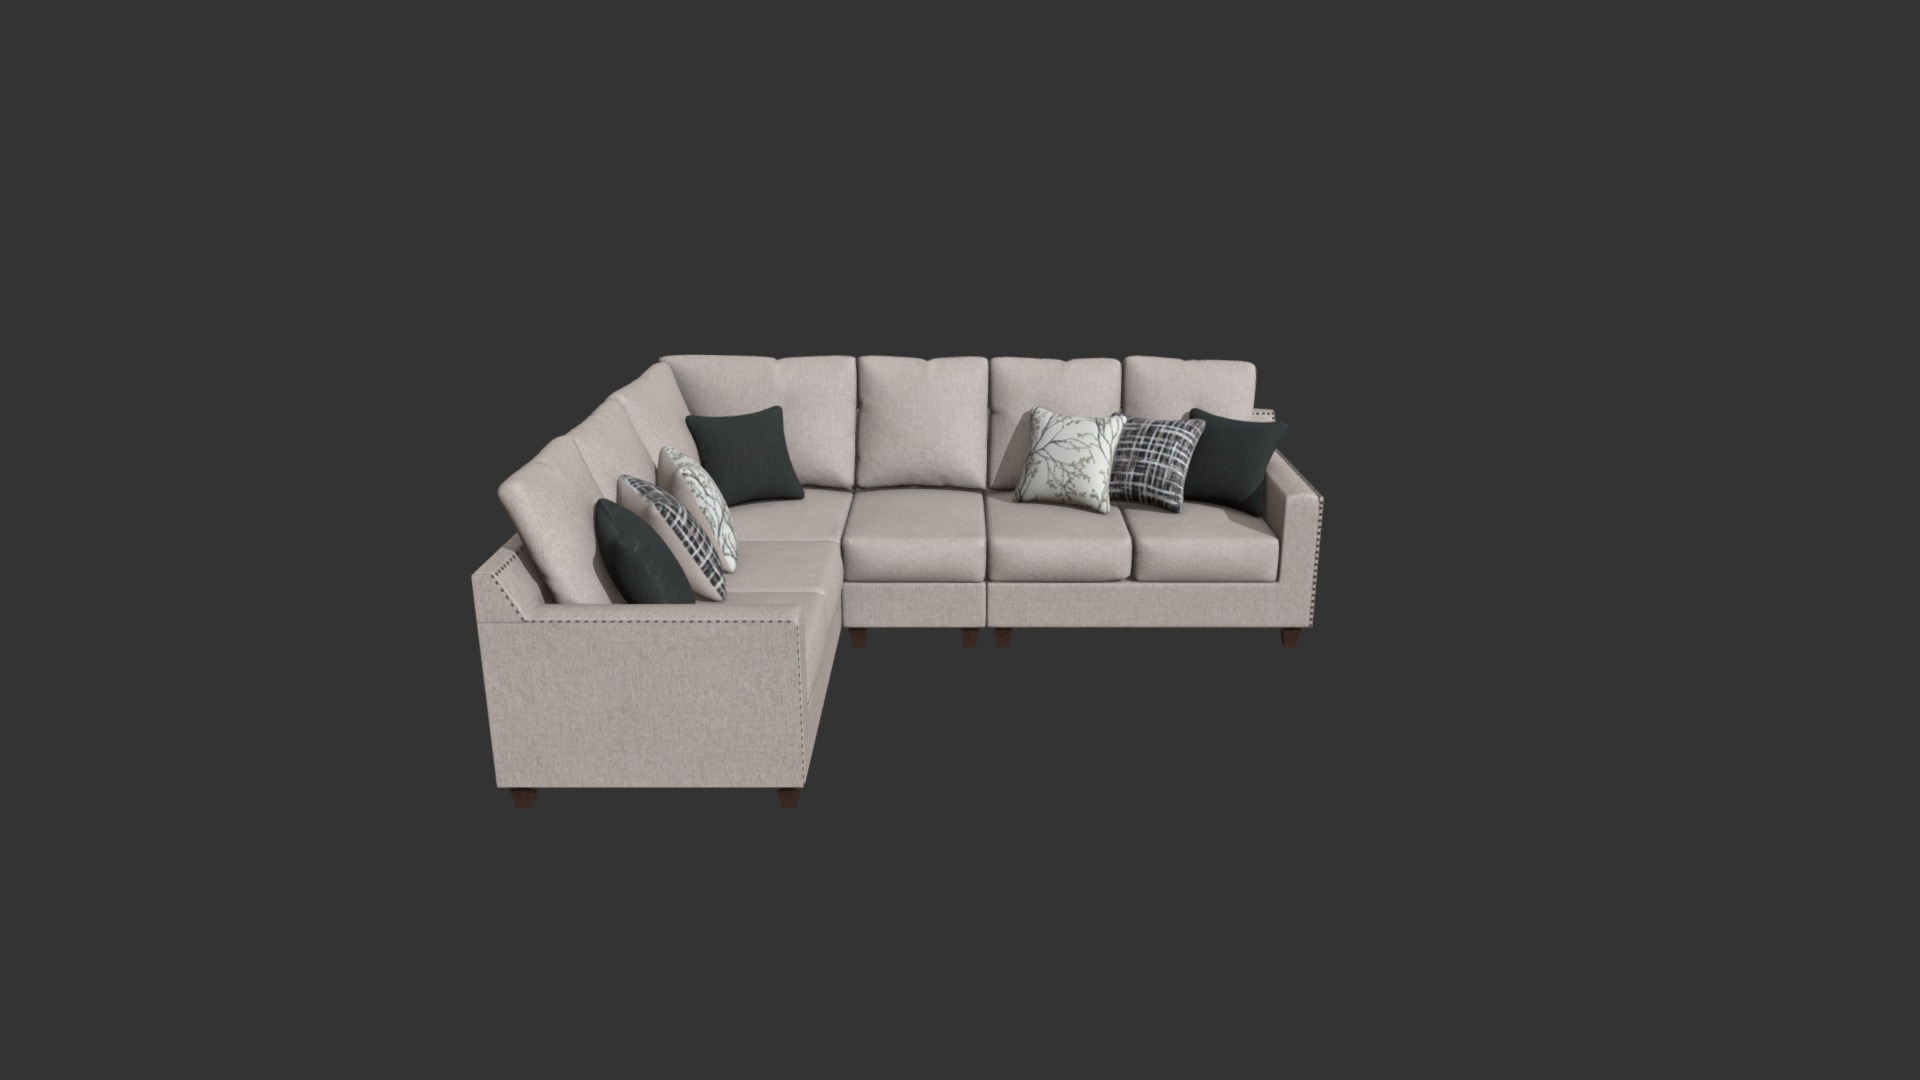 3D model Hallenberg sofa - This is a 3D model of the Hallenberg sofa. The 3D model is about a couch with pillows.